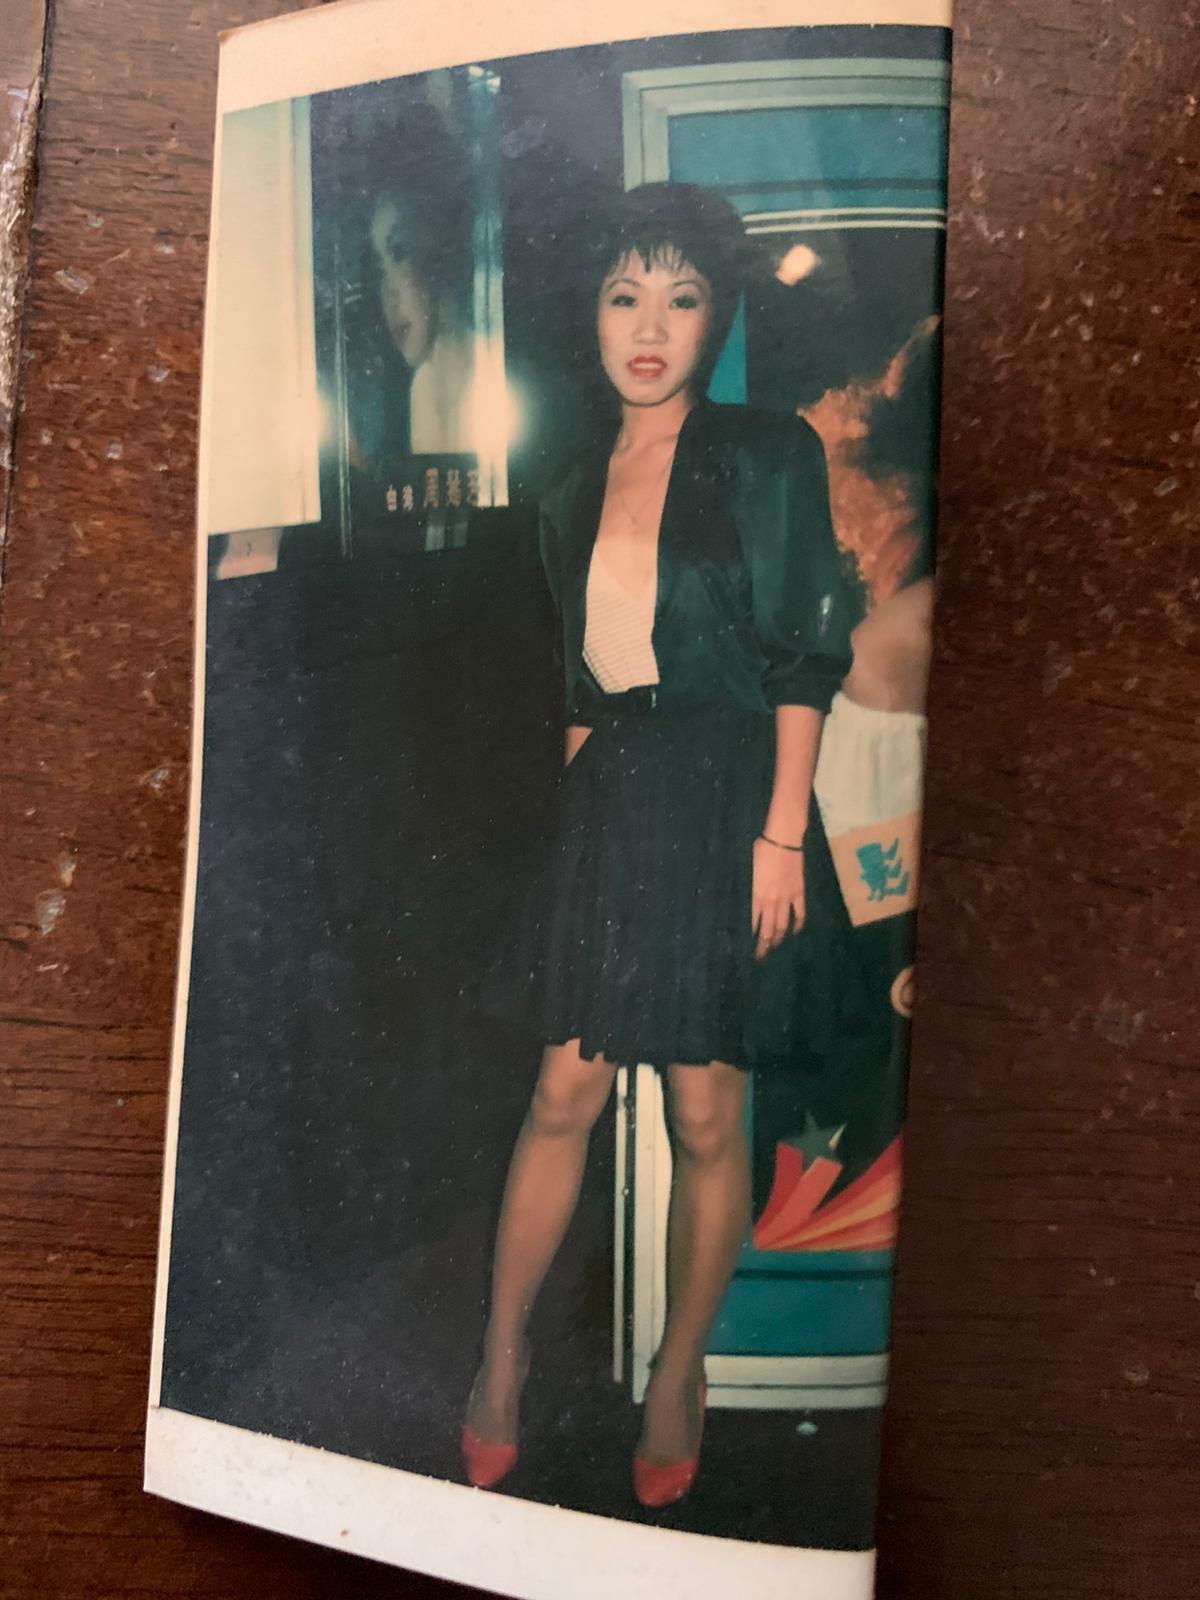 Lim during her days working at the discotheque, where she spent her nights abusing drugs in toilet cubicles. Photo courtesy of Violet Lim.